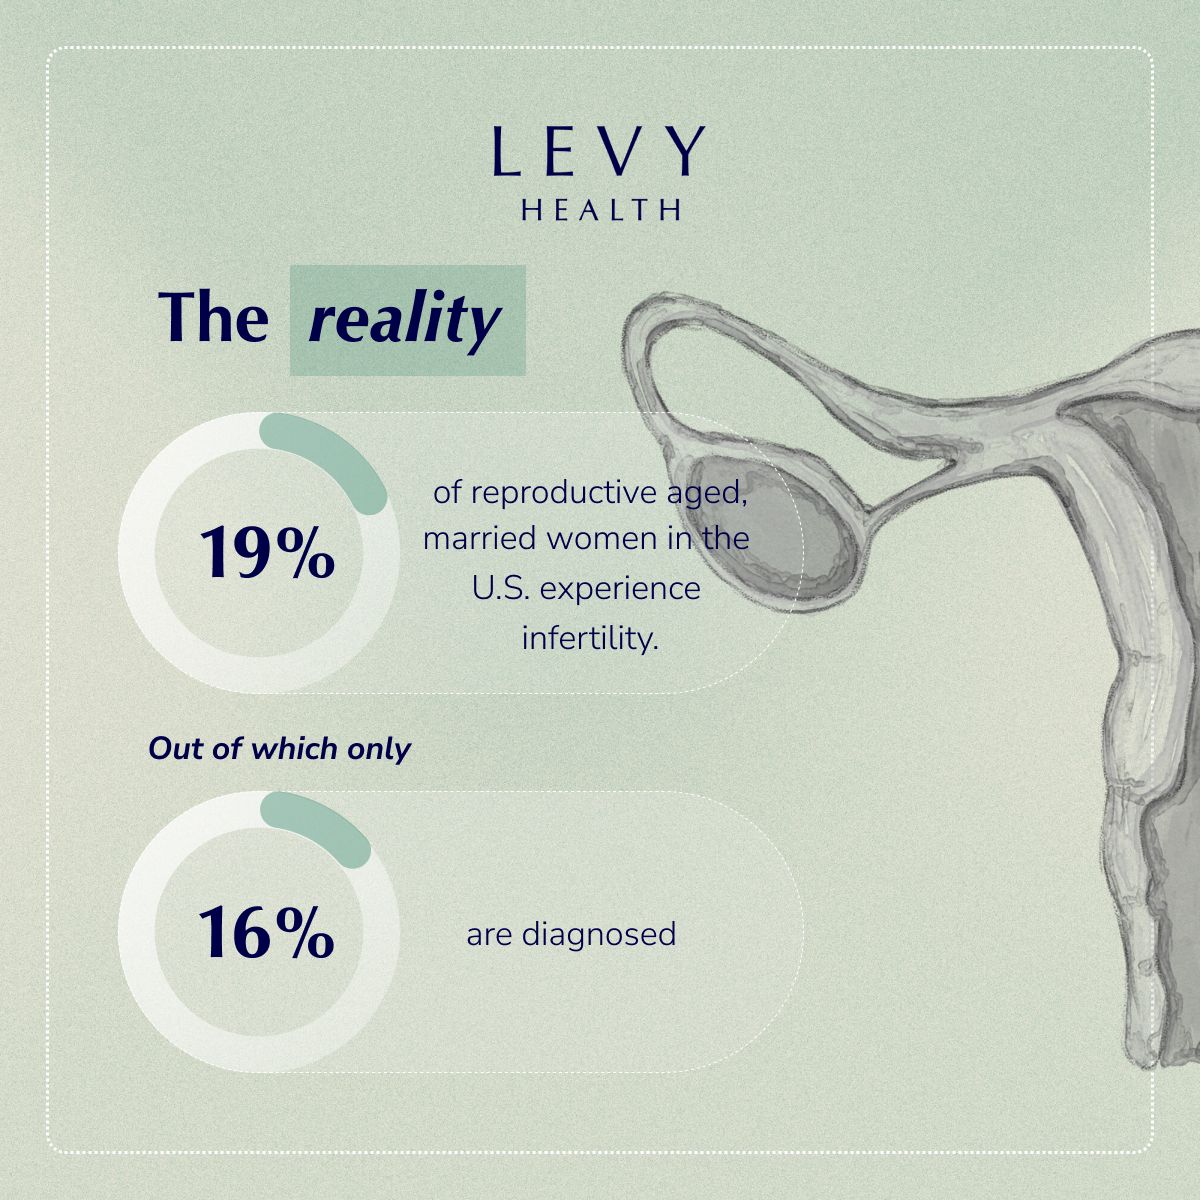 Levy Health